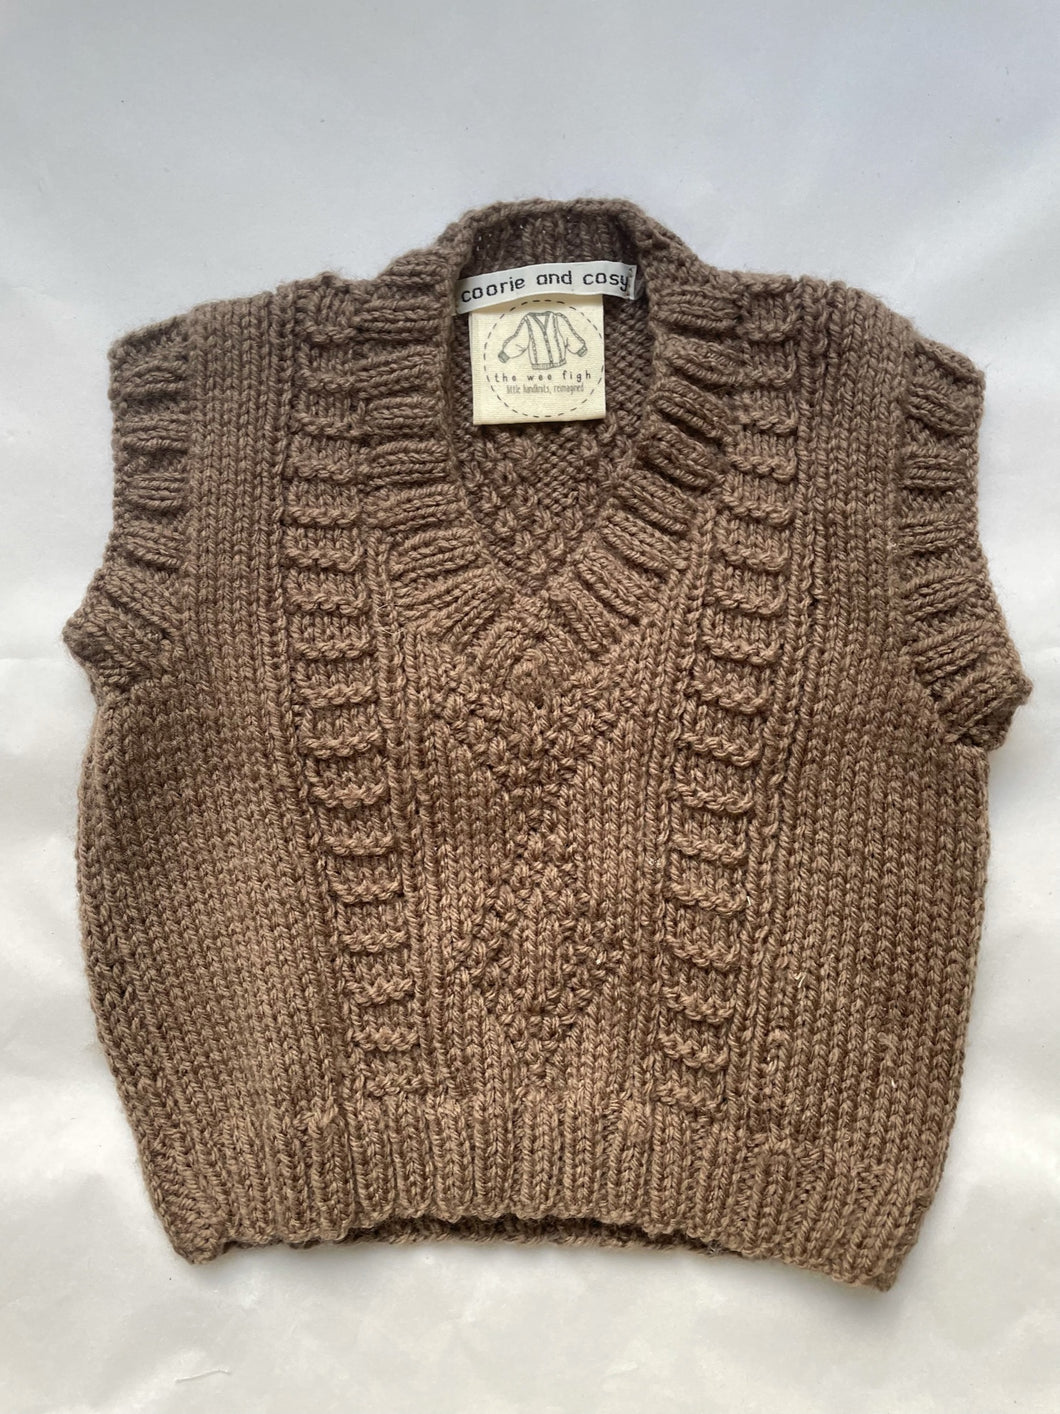 0-6 months - Brown knitted vest